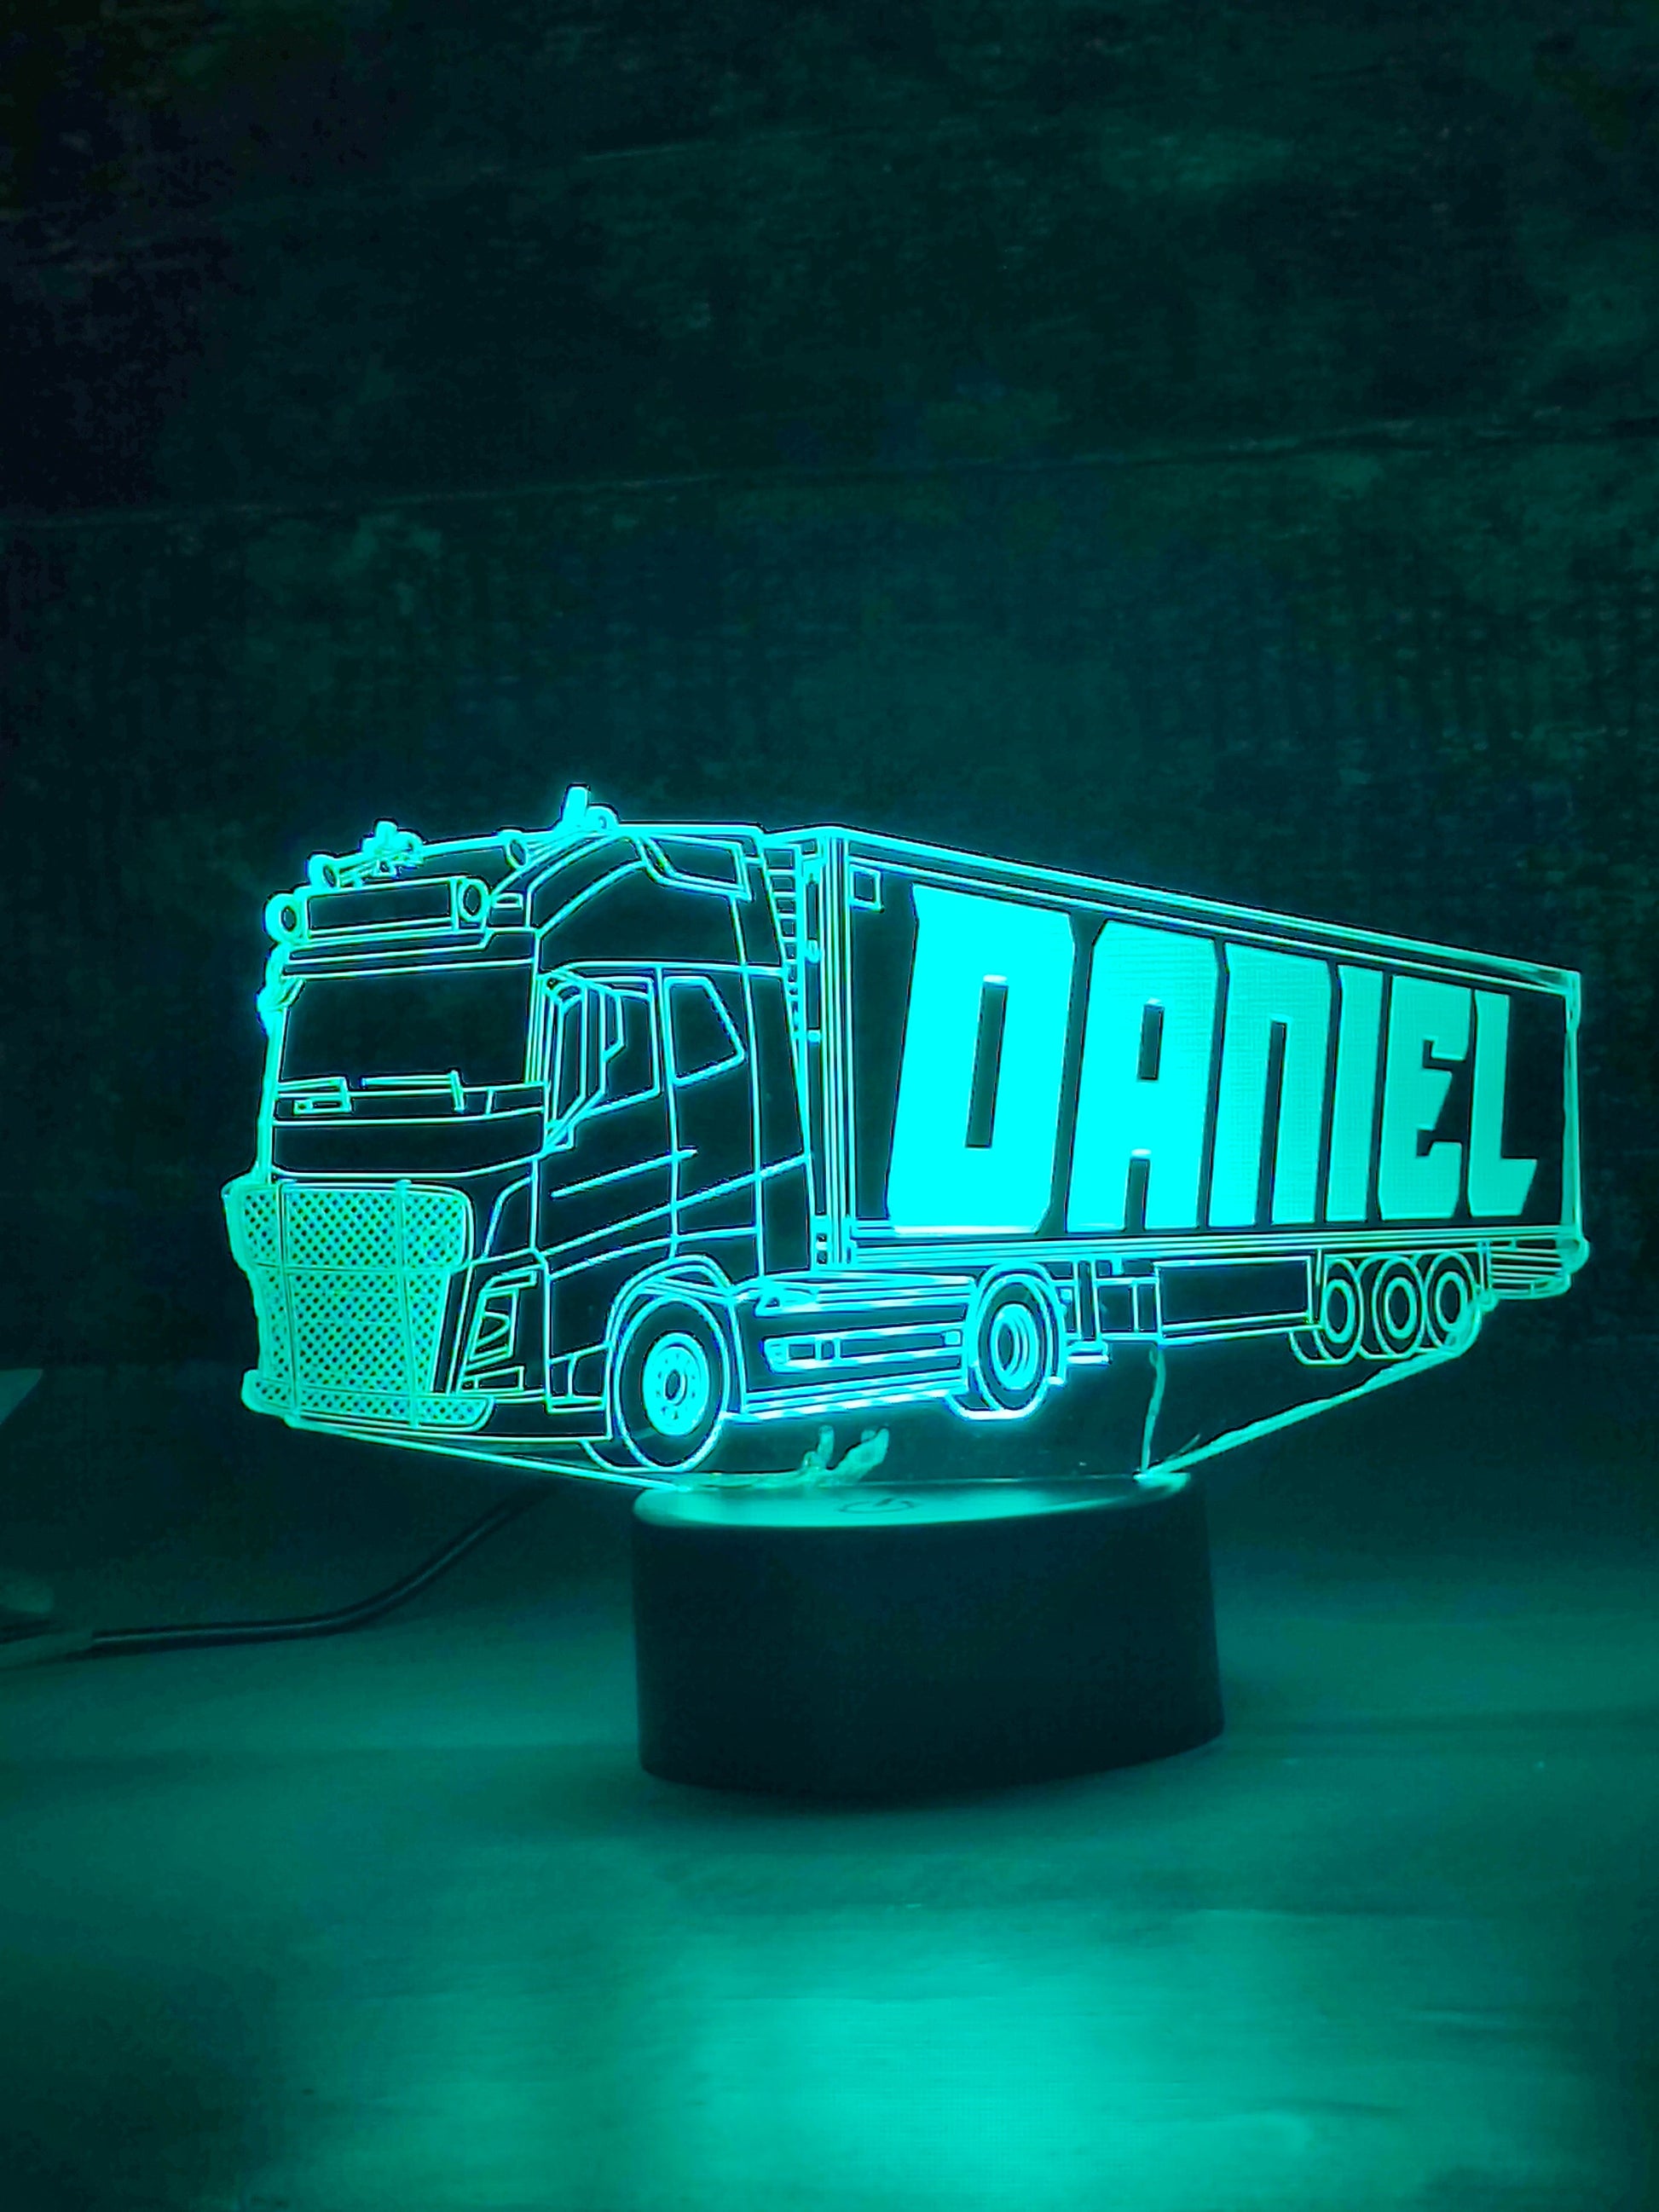 Truck and Trailer Artic FH Lorry Wagon Trucker Personalised Bluetooth LED  Illuminated Acrylic Sign 3D Night Light crafty-dan